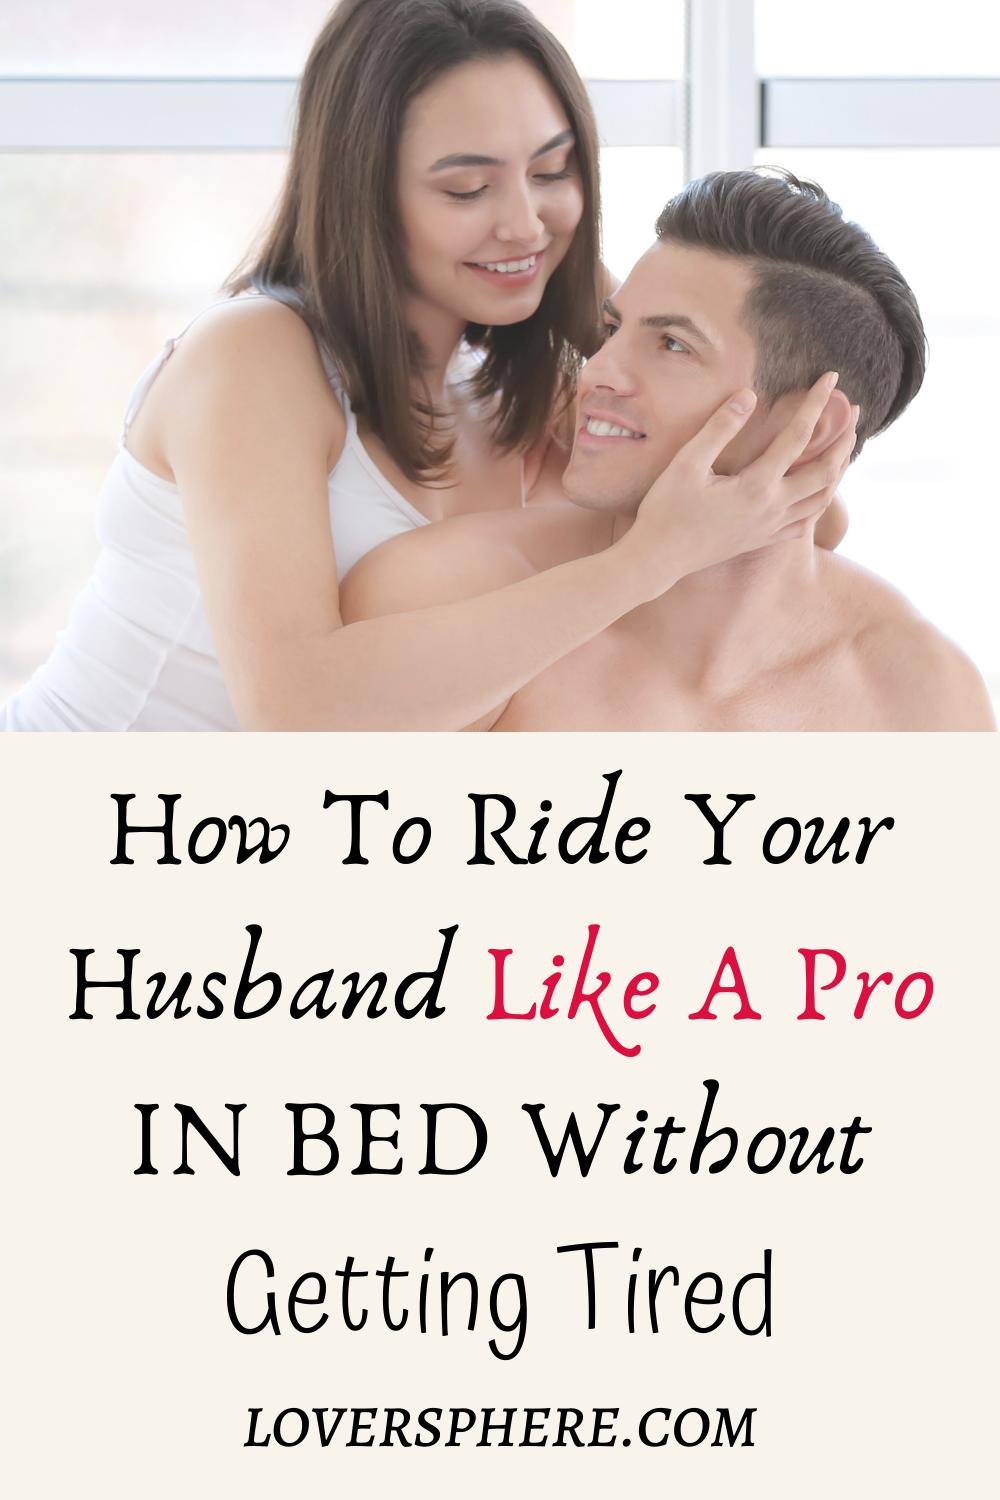 barb nickson recommends How To Ride A Man In Bed